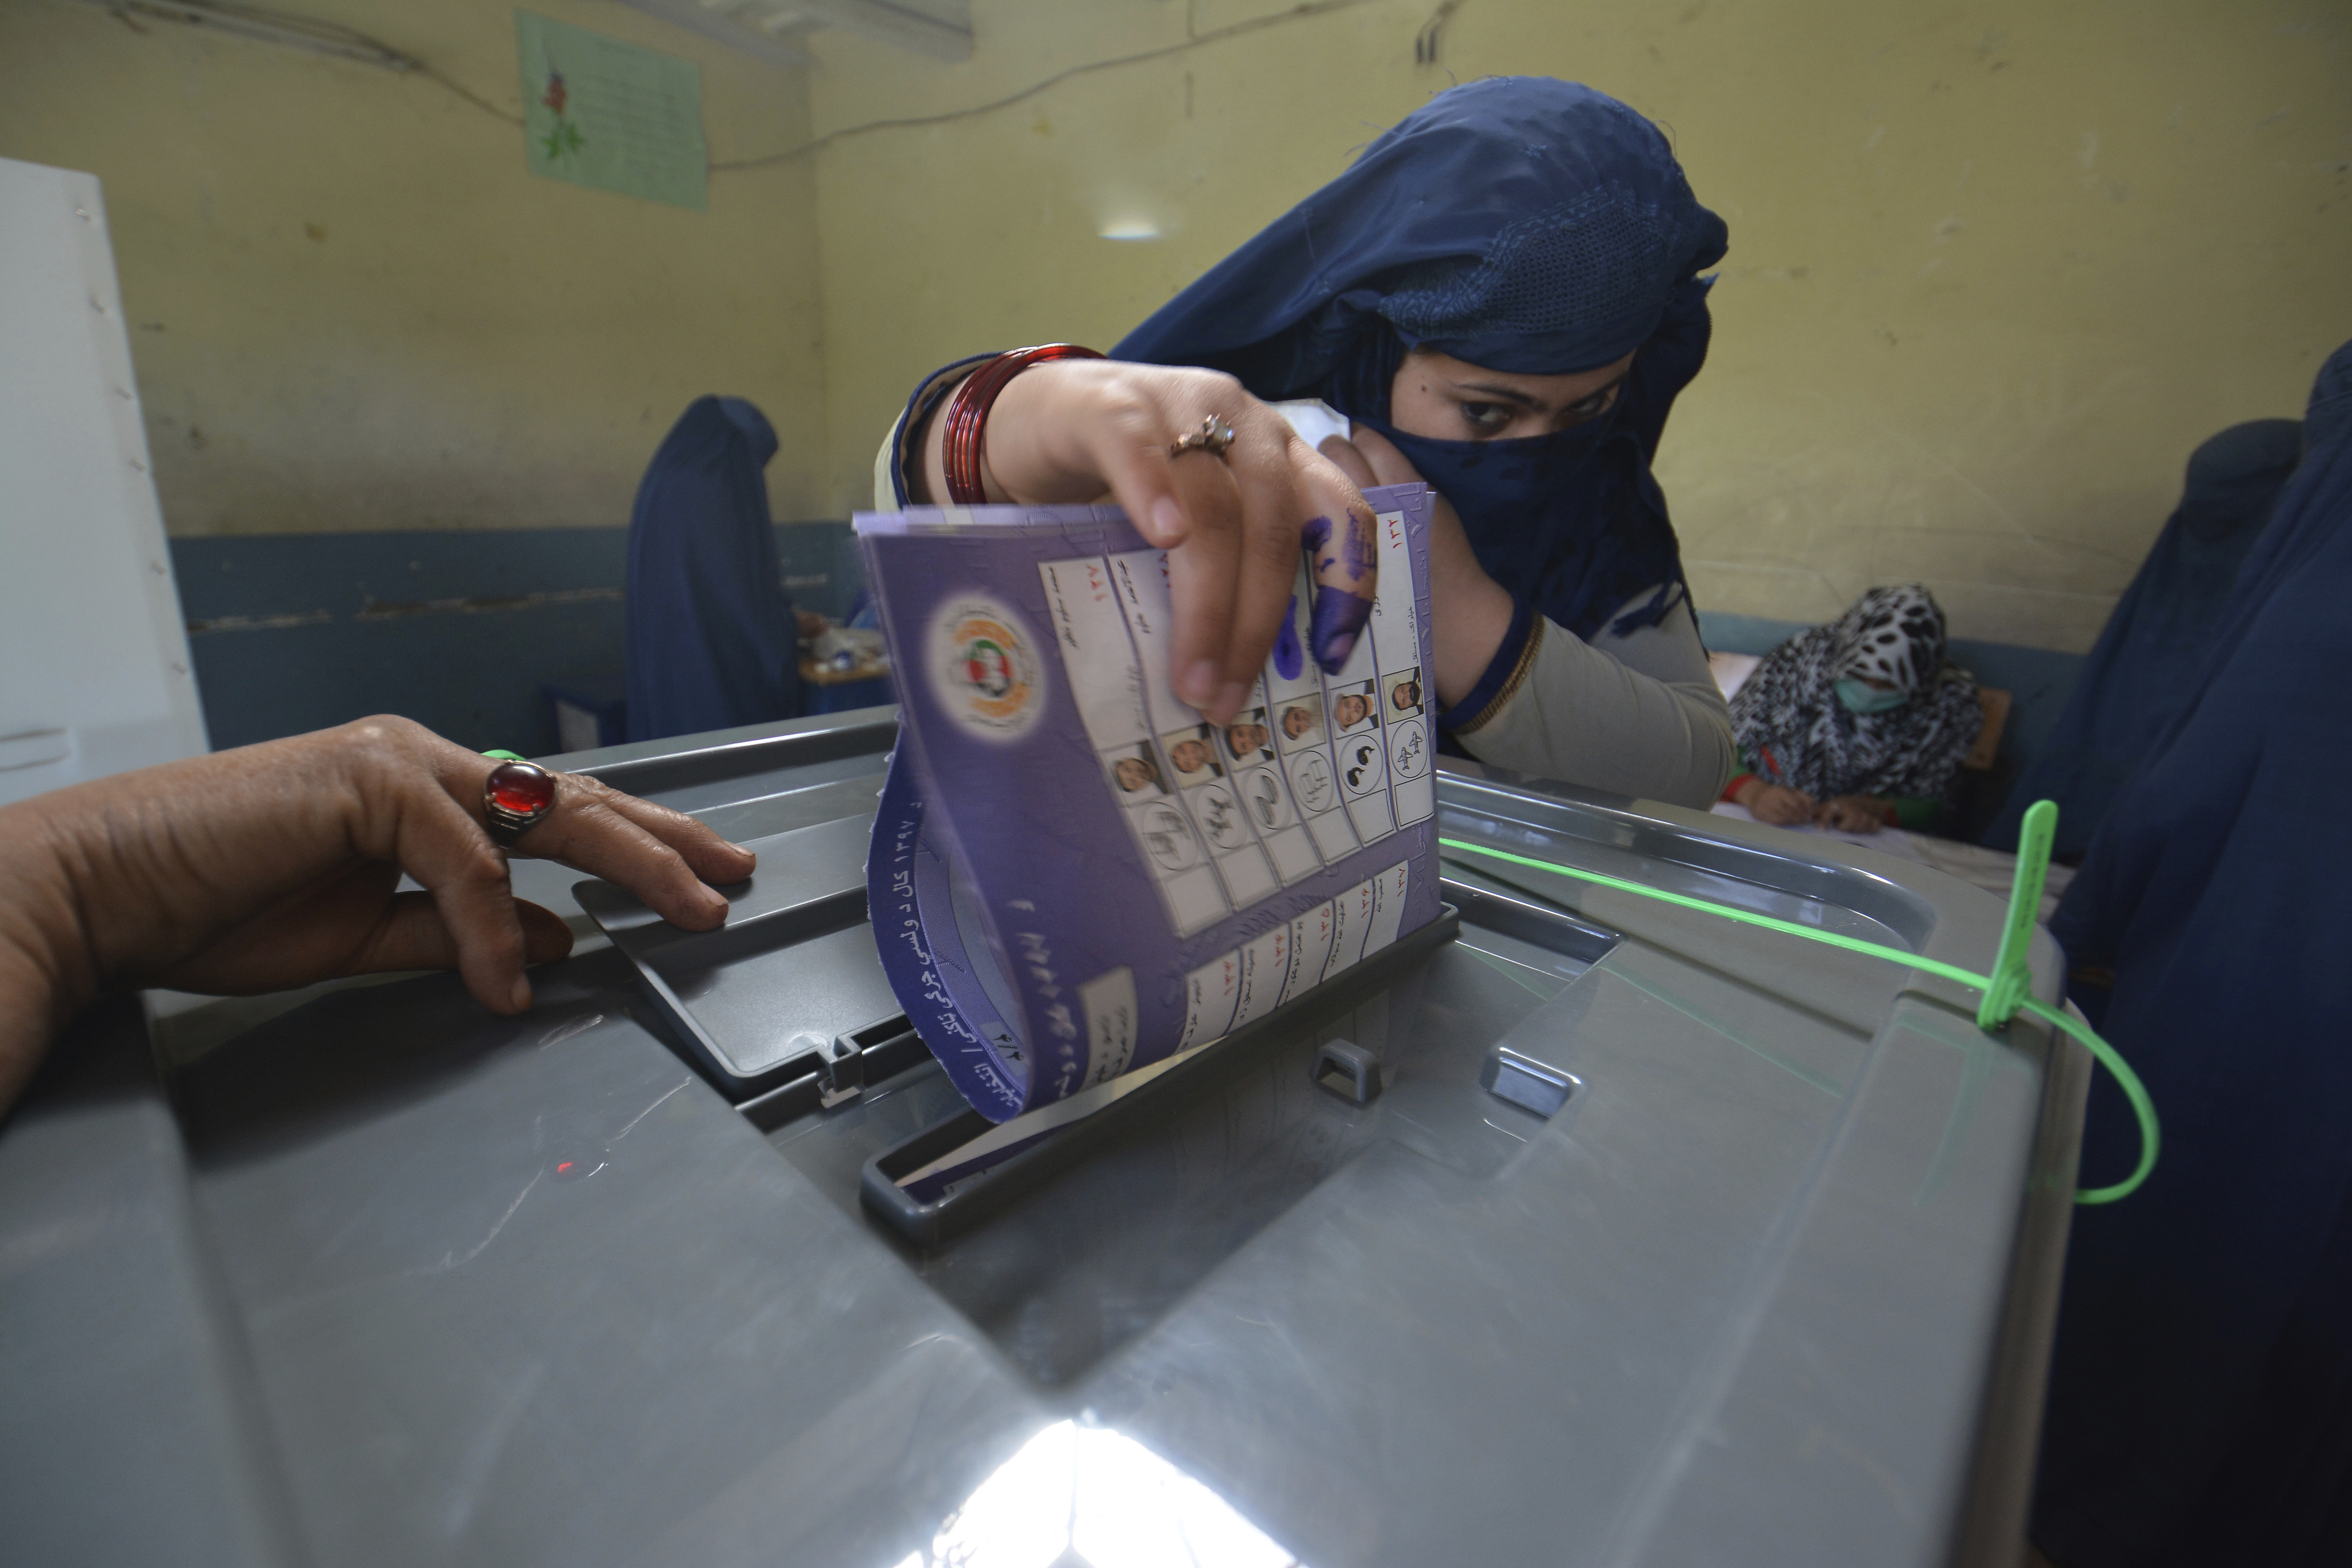 A woman casts her vote at a polling station in Jalalabad, capital of eastern Nangarhar province, Afghanistan